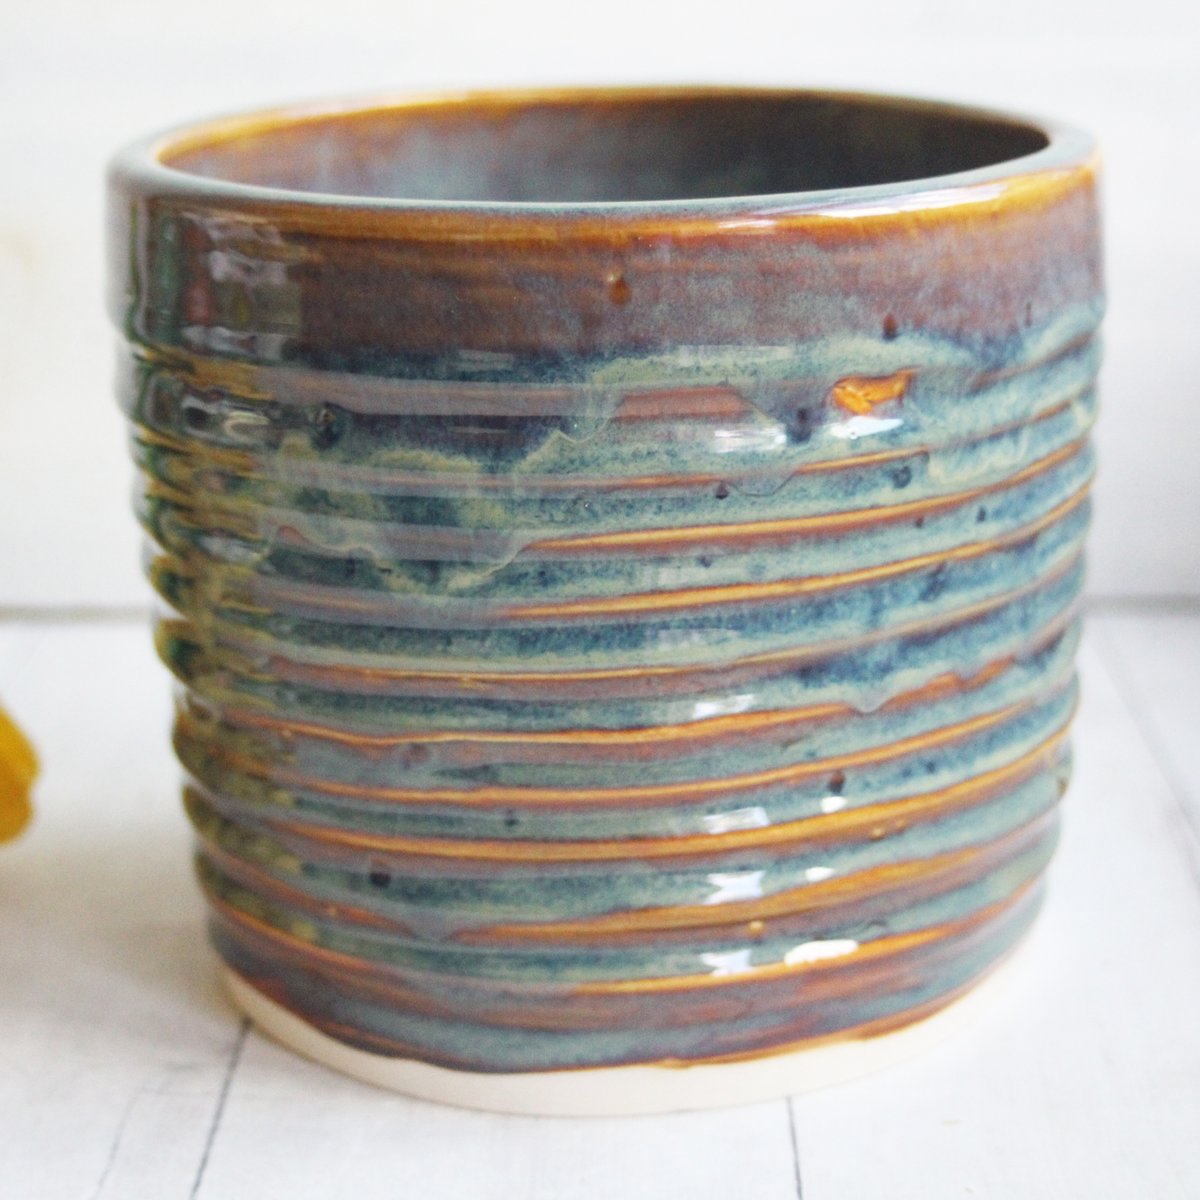 Andover Pottery — Utensil Holder in Deep Amber Brown and Blue Green Glaze,  Handmade Kitchen Crock, Made in USA